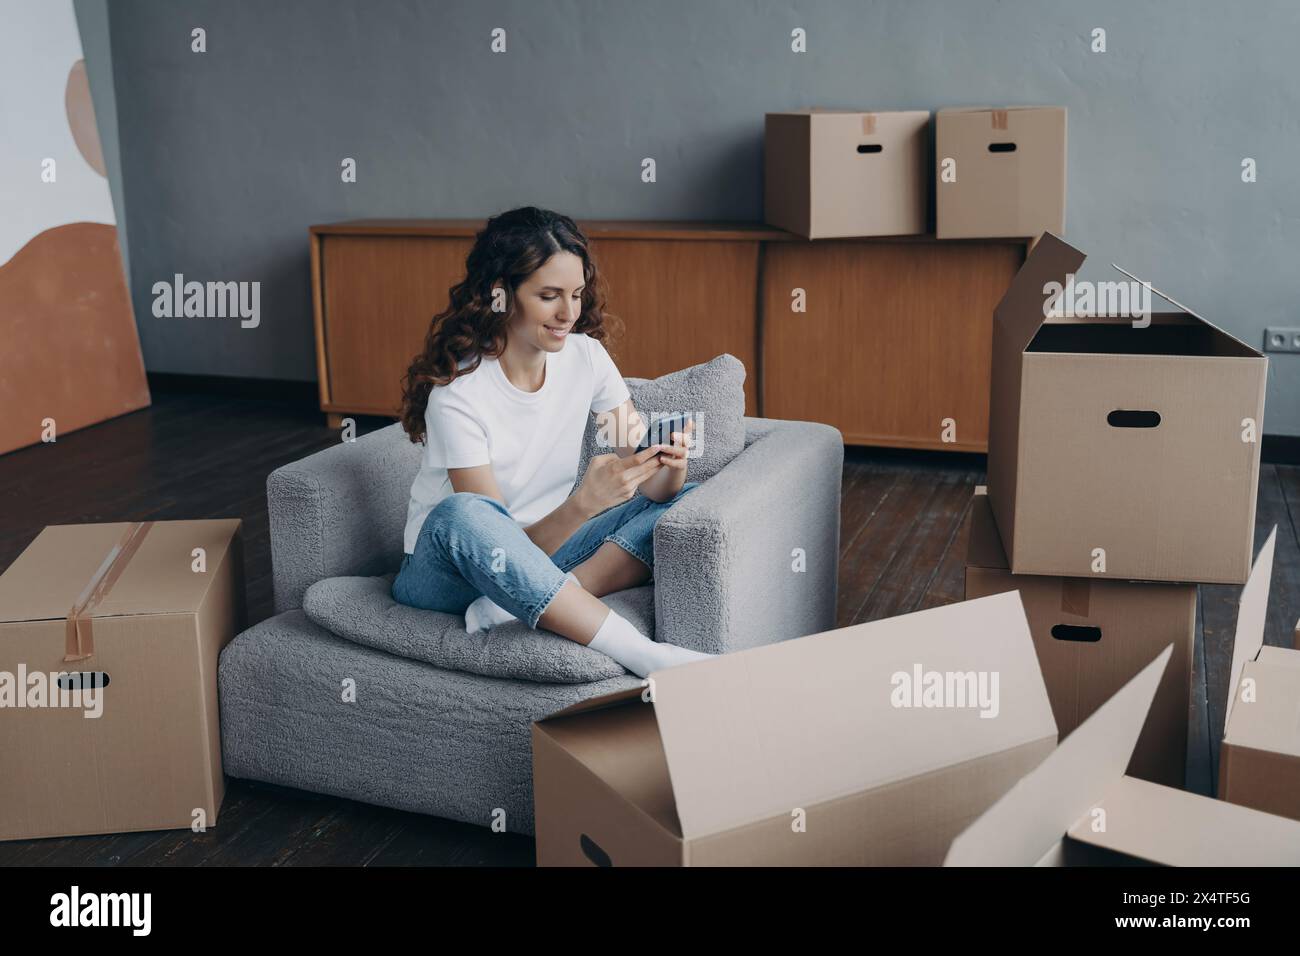 Casually dressed woman sitting comfortably in a chair using her smartphone, surrounded by boxes. Stock Photo